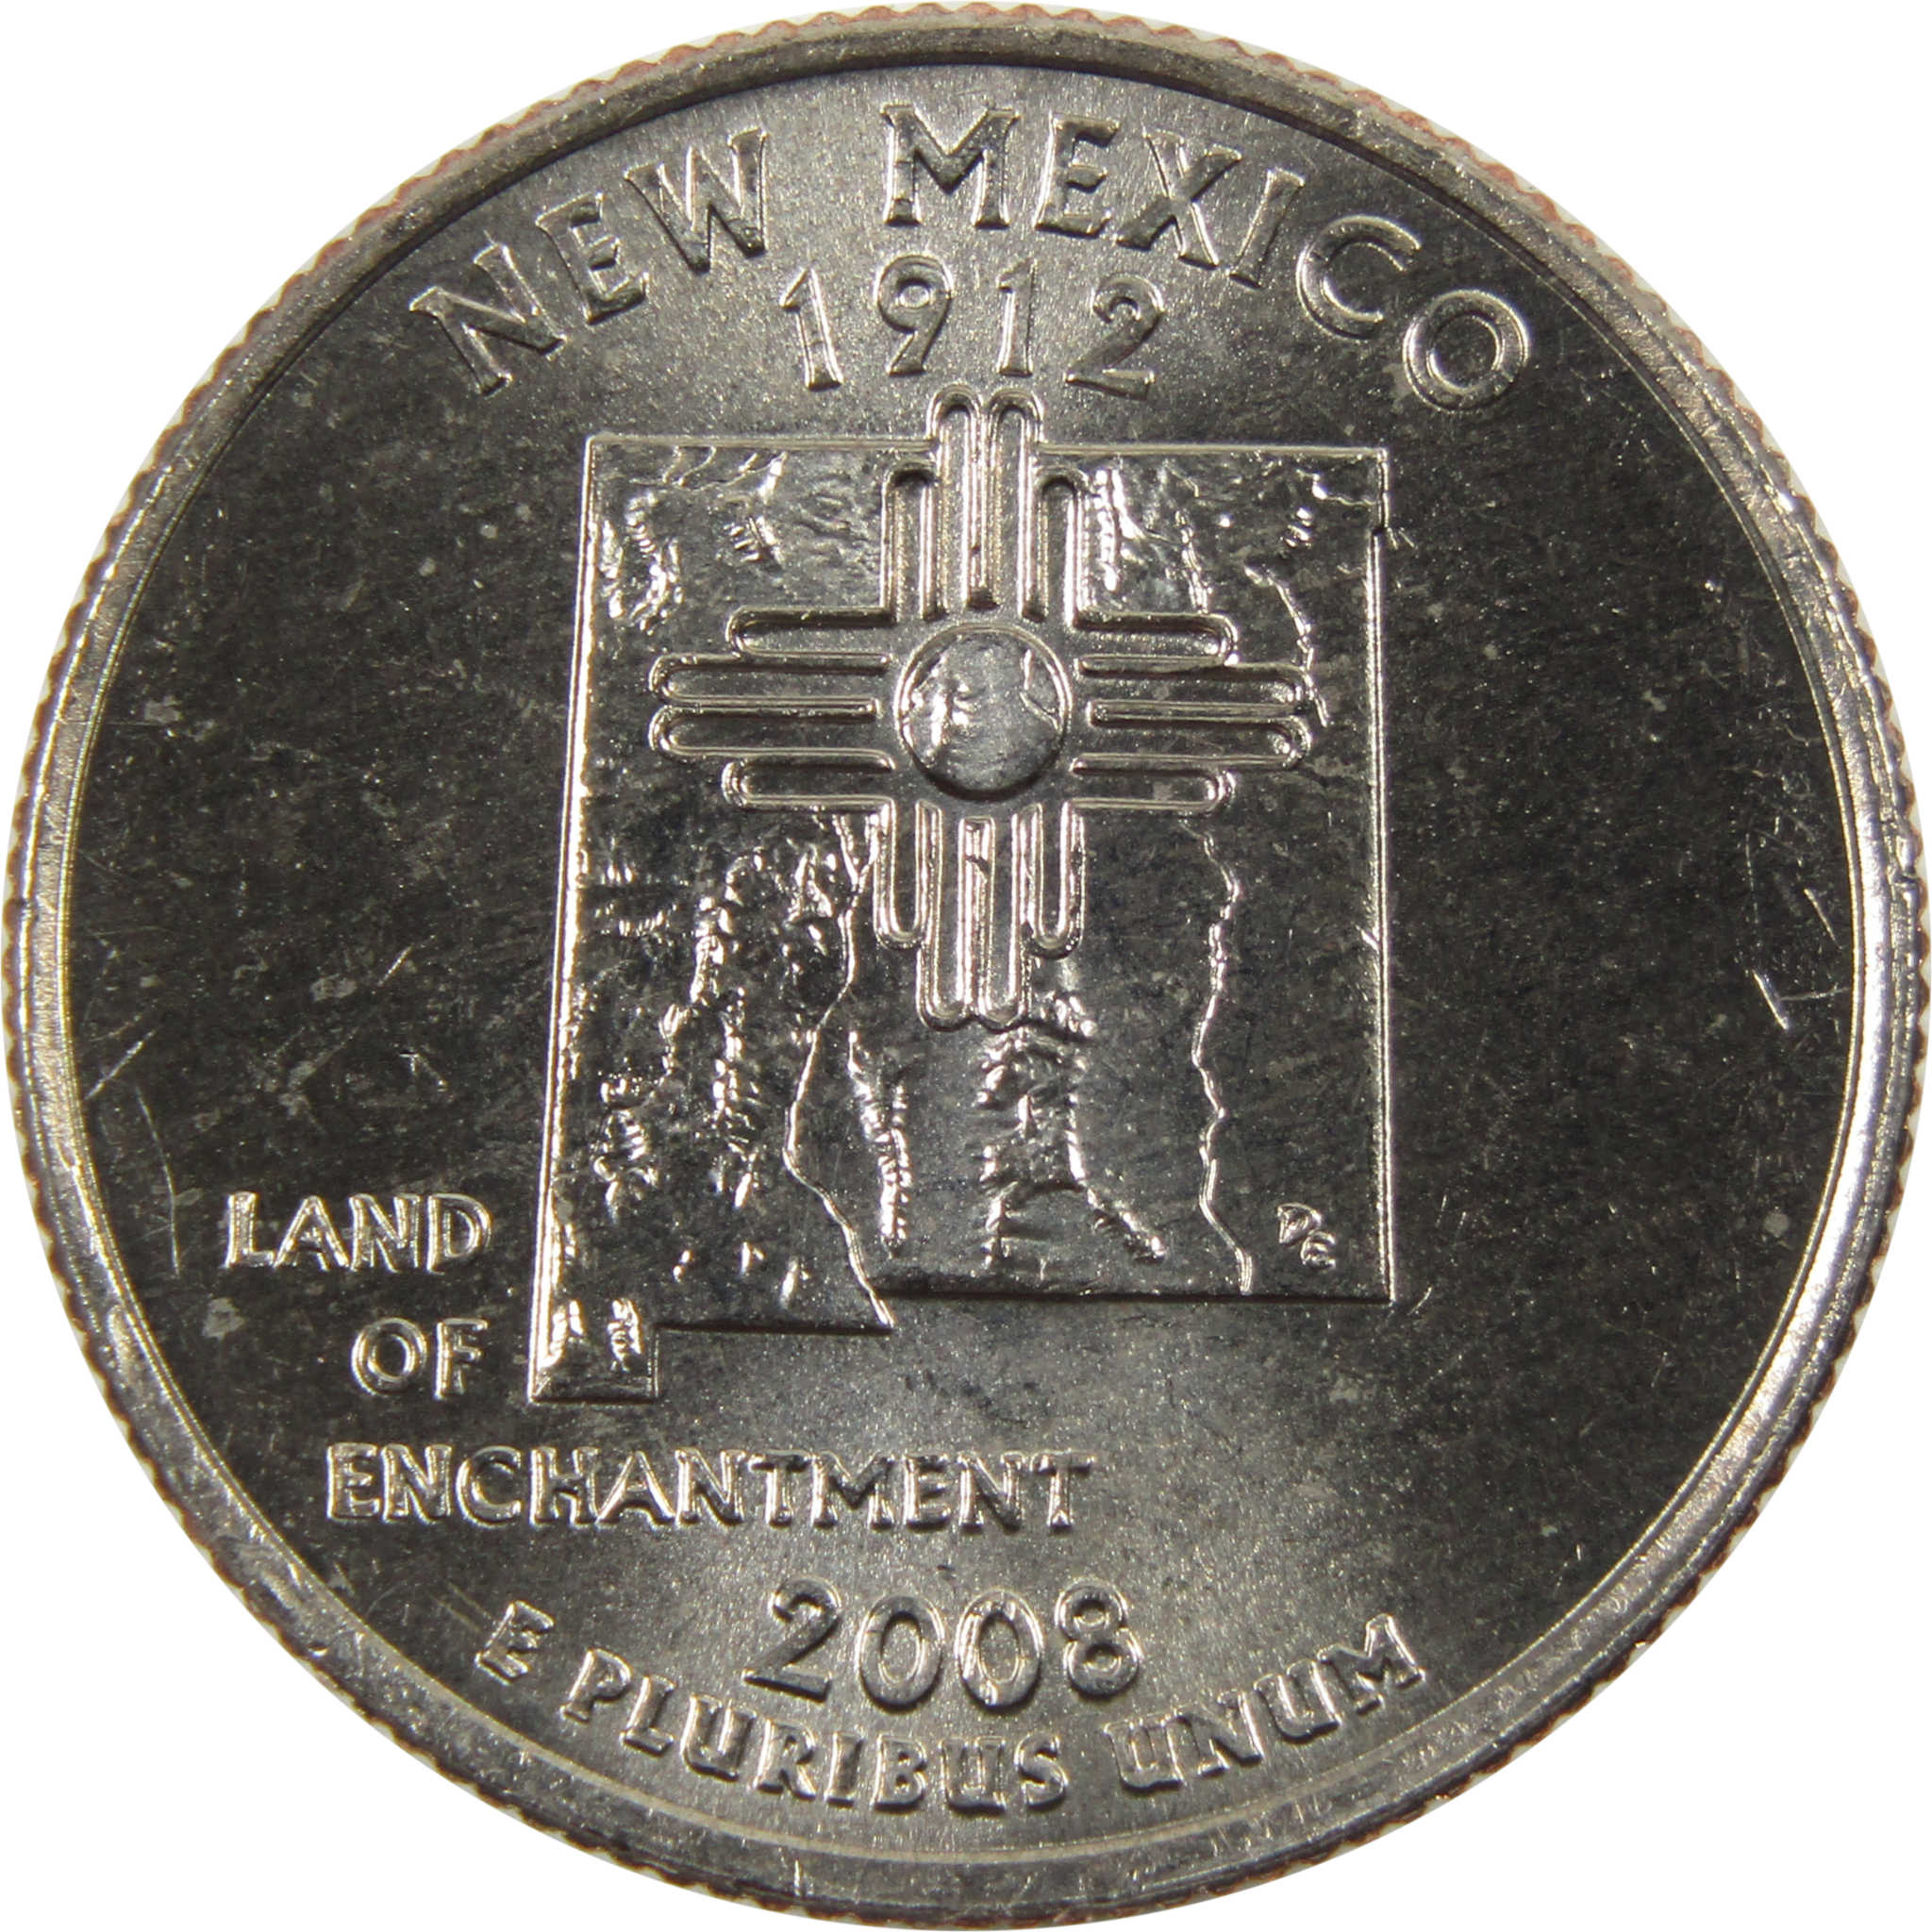 2008 P New Mexico State Quarter BU Uncirculated Clad 25c Coin